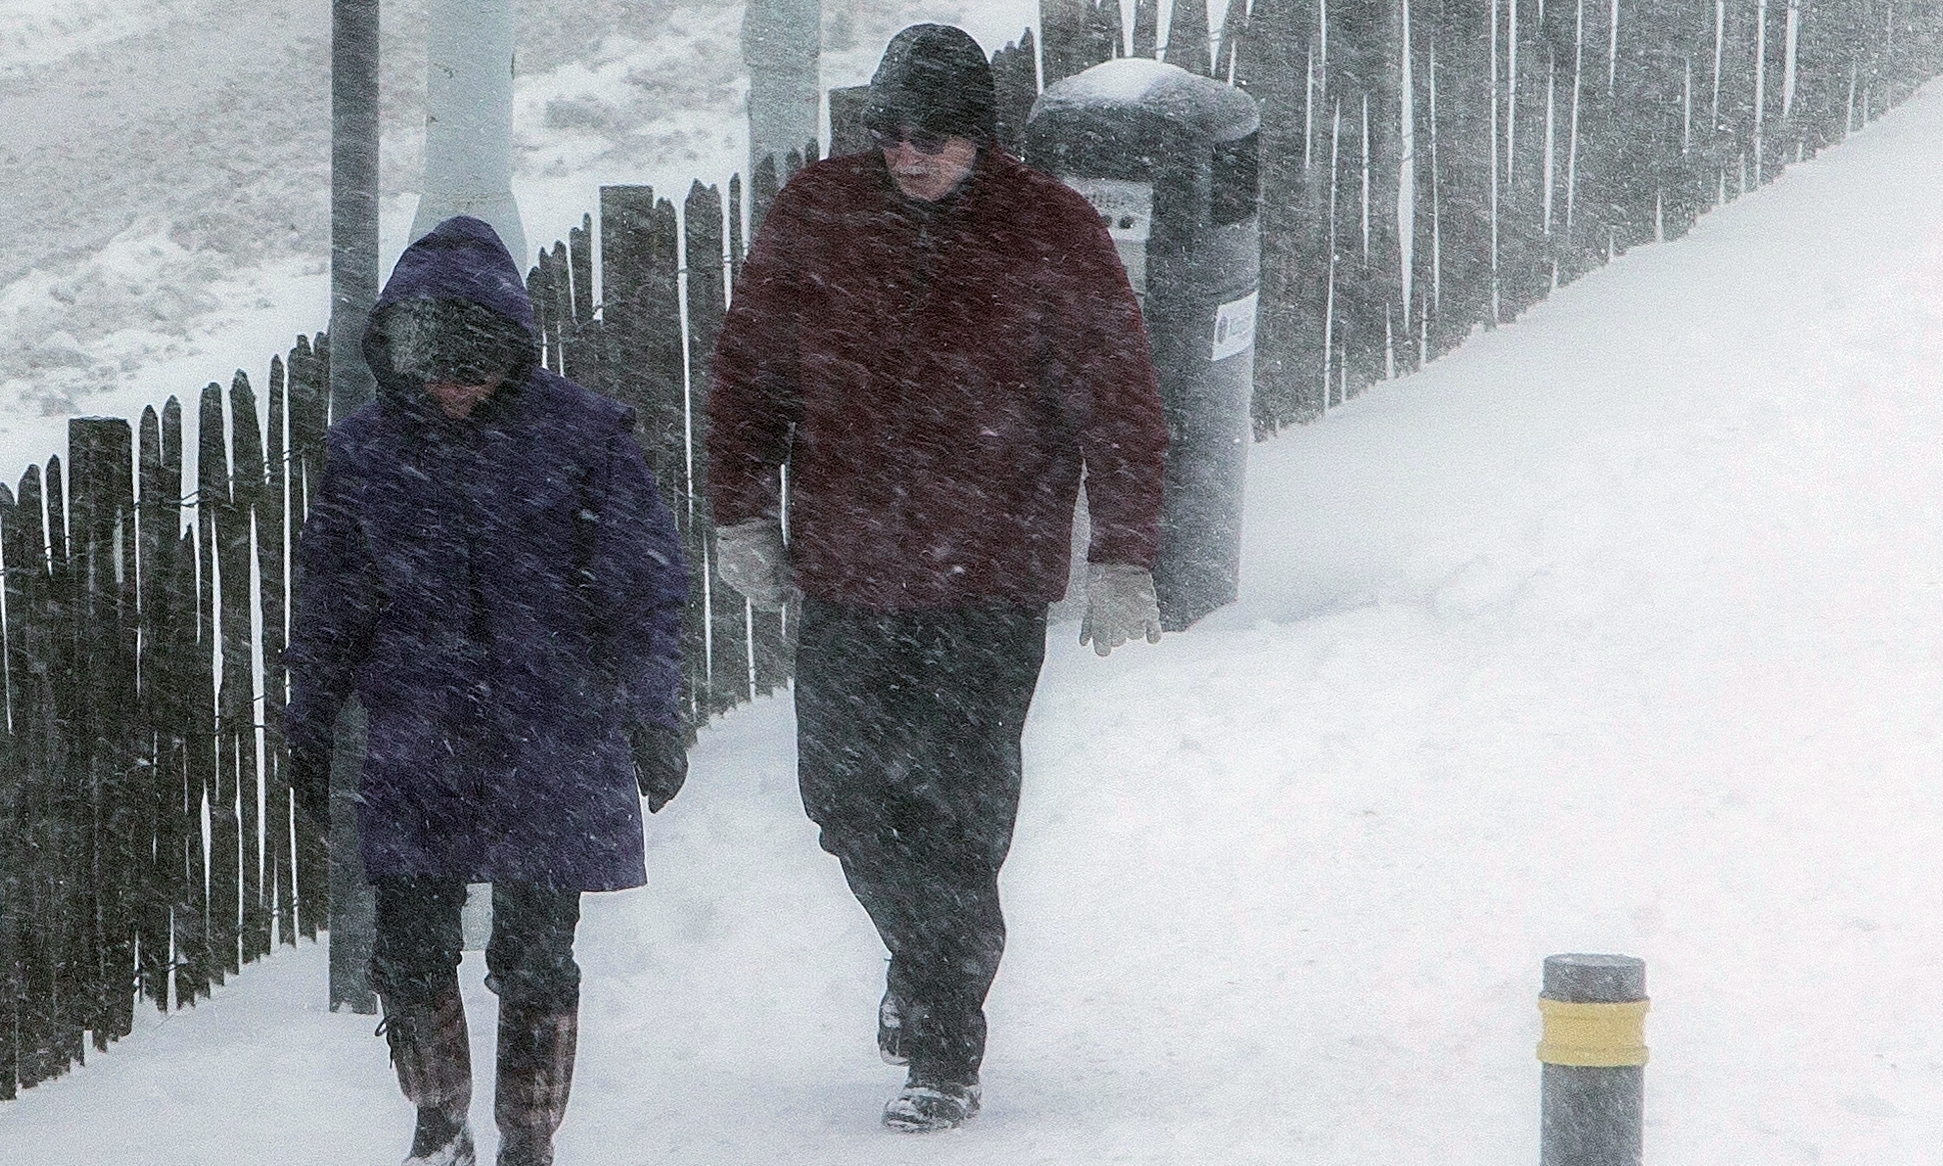 People trudge through the blizzard condition to try to get some necessary shopping in from the Kingdom Centre in Glenrothes.